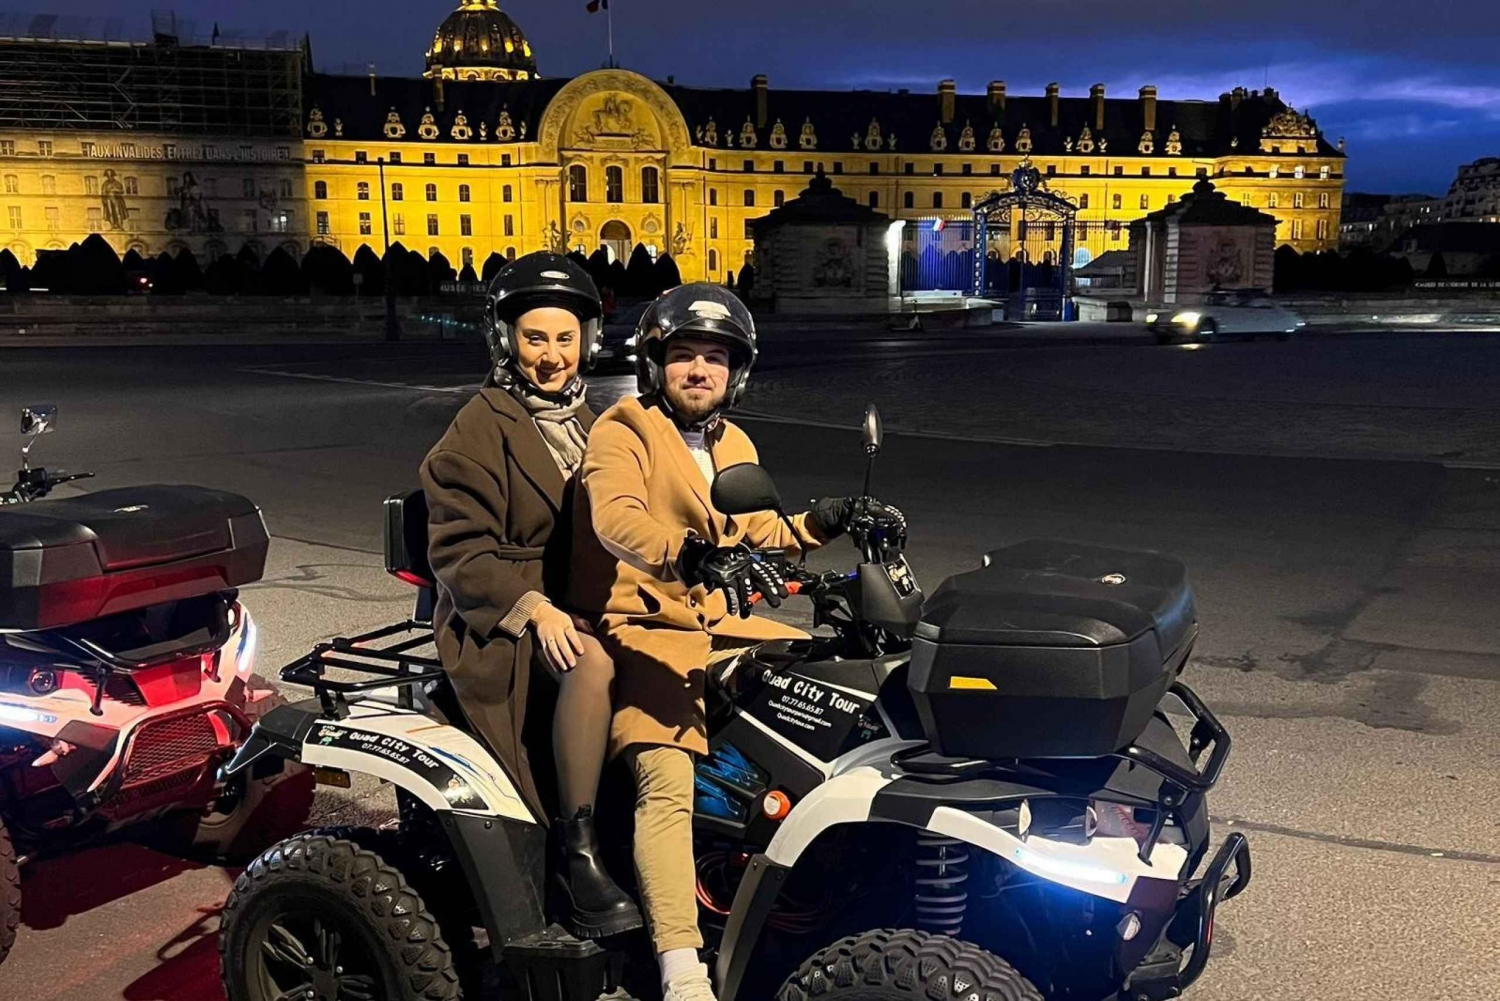 Paris: Electric Quad Tour from 16 with No Licence